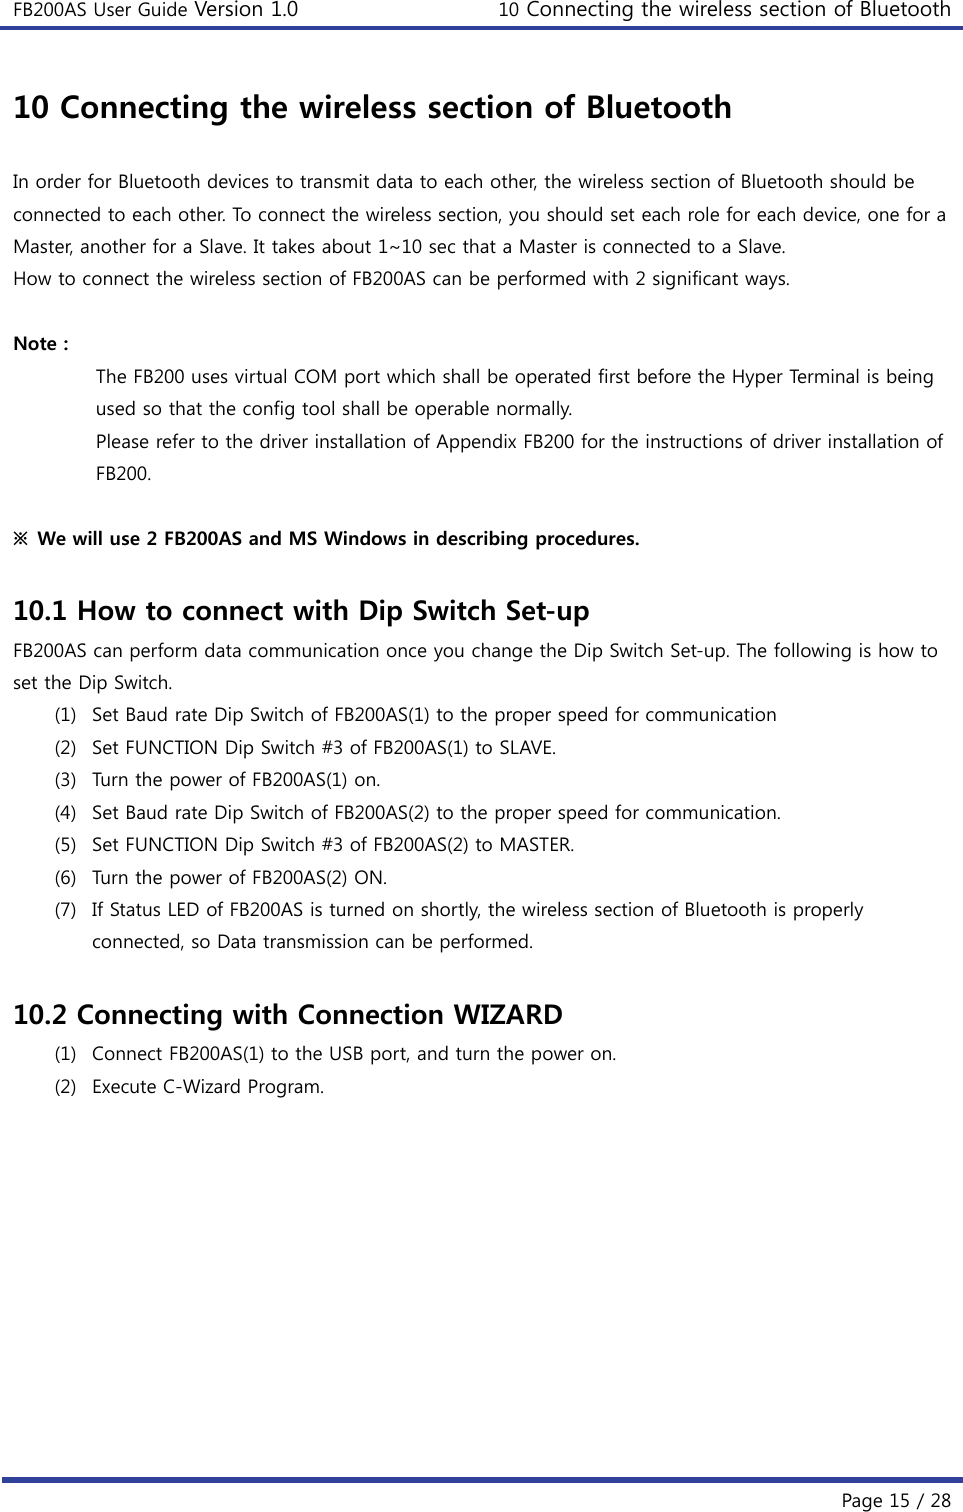 FB200AS User Guide Version 1.0 10 Connecting the wireless section of Bluetooth  Page 15 / 28 10 Connecting the wireless section of Bluetooth  In order for Bluetooth devices to transmit data to each other, the wireless section of Bluetooth should be connected to each other. To connect the wireless section, you should set each role for each device, one for a Master, another for a Slave. It takes about 1~10 sec that a Master is connected to a Slave. How to connect the wireless section of FB200AS can be performed with 2 significant ways.    Note :   The FB200 uses virtual COM port which shall be operated first before the Hyper Terminal is being used so that the config tool shall be operable normally. Please refer to the driver installation of Appendix FB200 for the instructions of driver installation of FB200.  ※  We will use 2 FB200AS and MS Windows in describing procedures.      10.1 How to connect with Dip Switch Set-up FB200AS can perform data communication once you change the Dip Switch Set-up. The following is how to set the Dip Switch. (1) Set Baud rate Dip Switch of FB200AS(1) to the proper speed for communication (2) Set FUNCTION Dip Switch #3 of FB200AS(1) to SLAVE. (3) Turn the power of FB200AS(1) on. (4) Set Baud rate Dip Switch of FB200AS(2) to the proper speed for communication. (5) Set FUNCTION Dip Switch #3 of FB200AS(2) to MASTER. (6) Turn the power of FB200AS(2) ON. (7) If Status LED of FB200AS is turned on shortly, the wireless section of Bluetooth is properly connected, so Data transmission can be performed.  10.2 Connecting with Connection WIZARD (1) Connect FB200AS(1) to the USB port, and turn the power on. (2) Execute C-Wizard Program.  